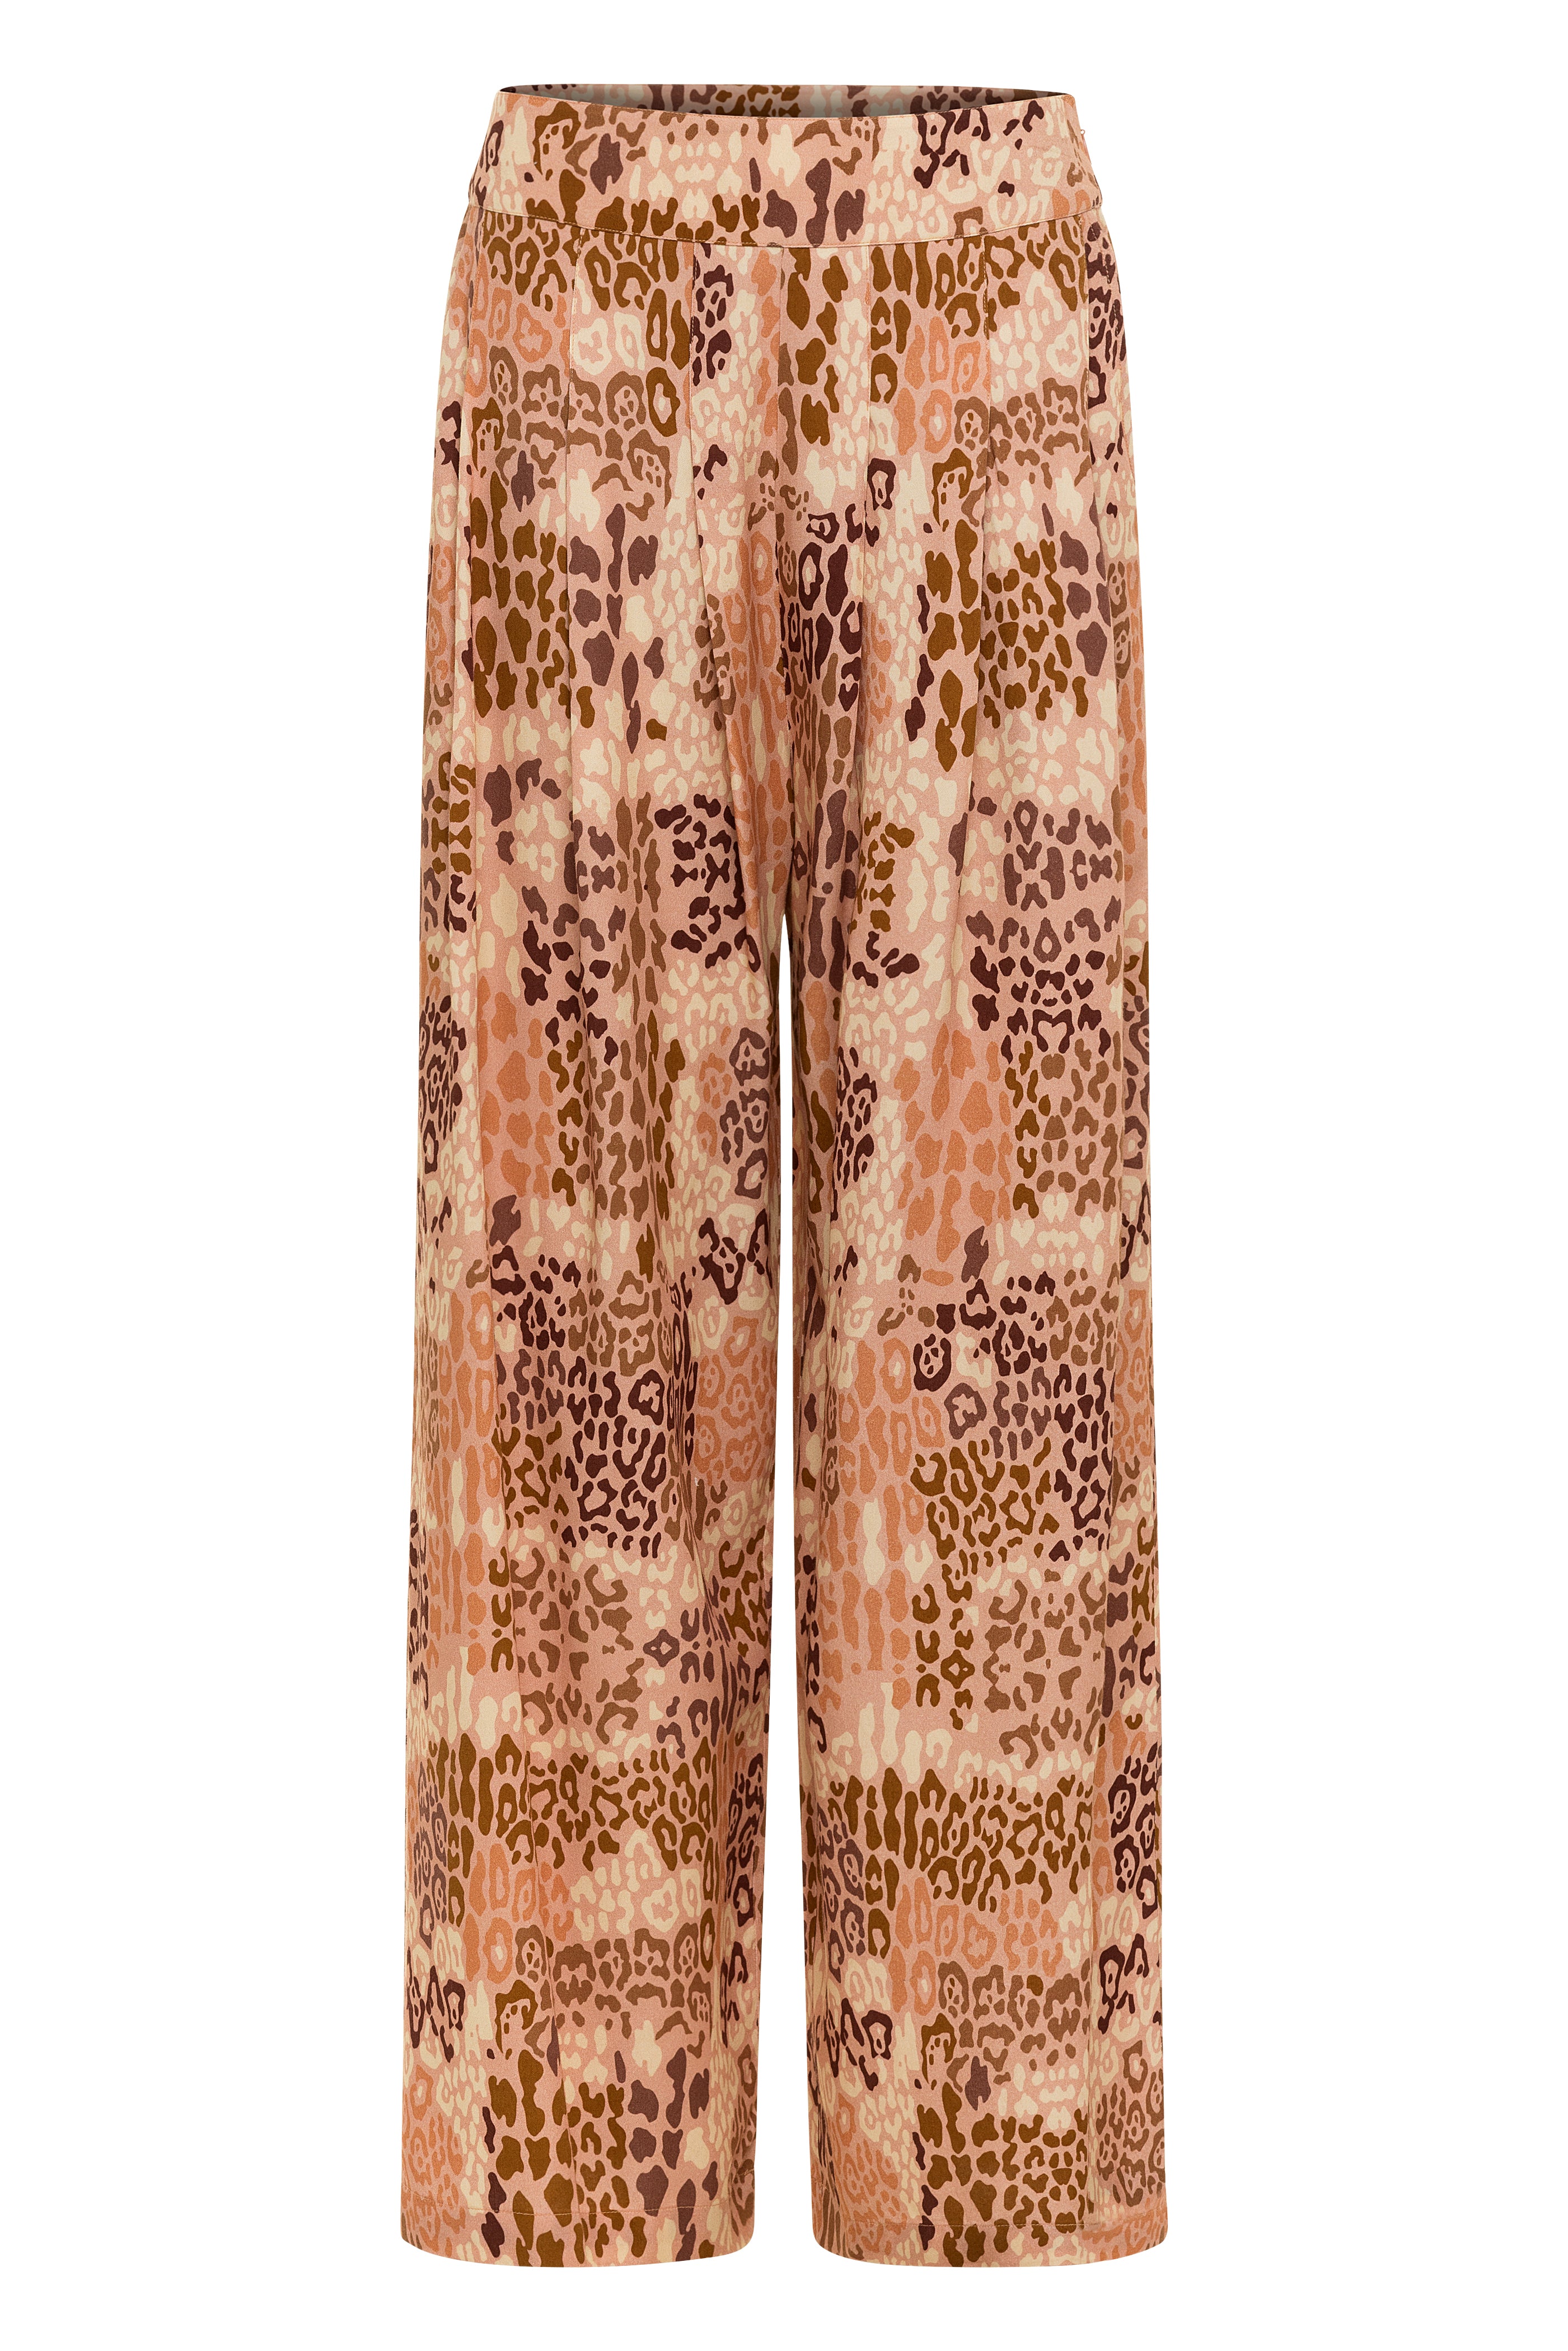 Buy Mohito women tie closure trousers tan Online | Brands For Less